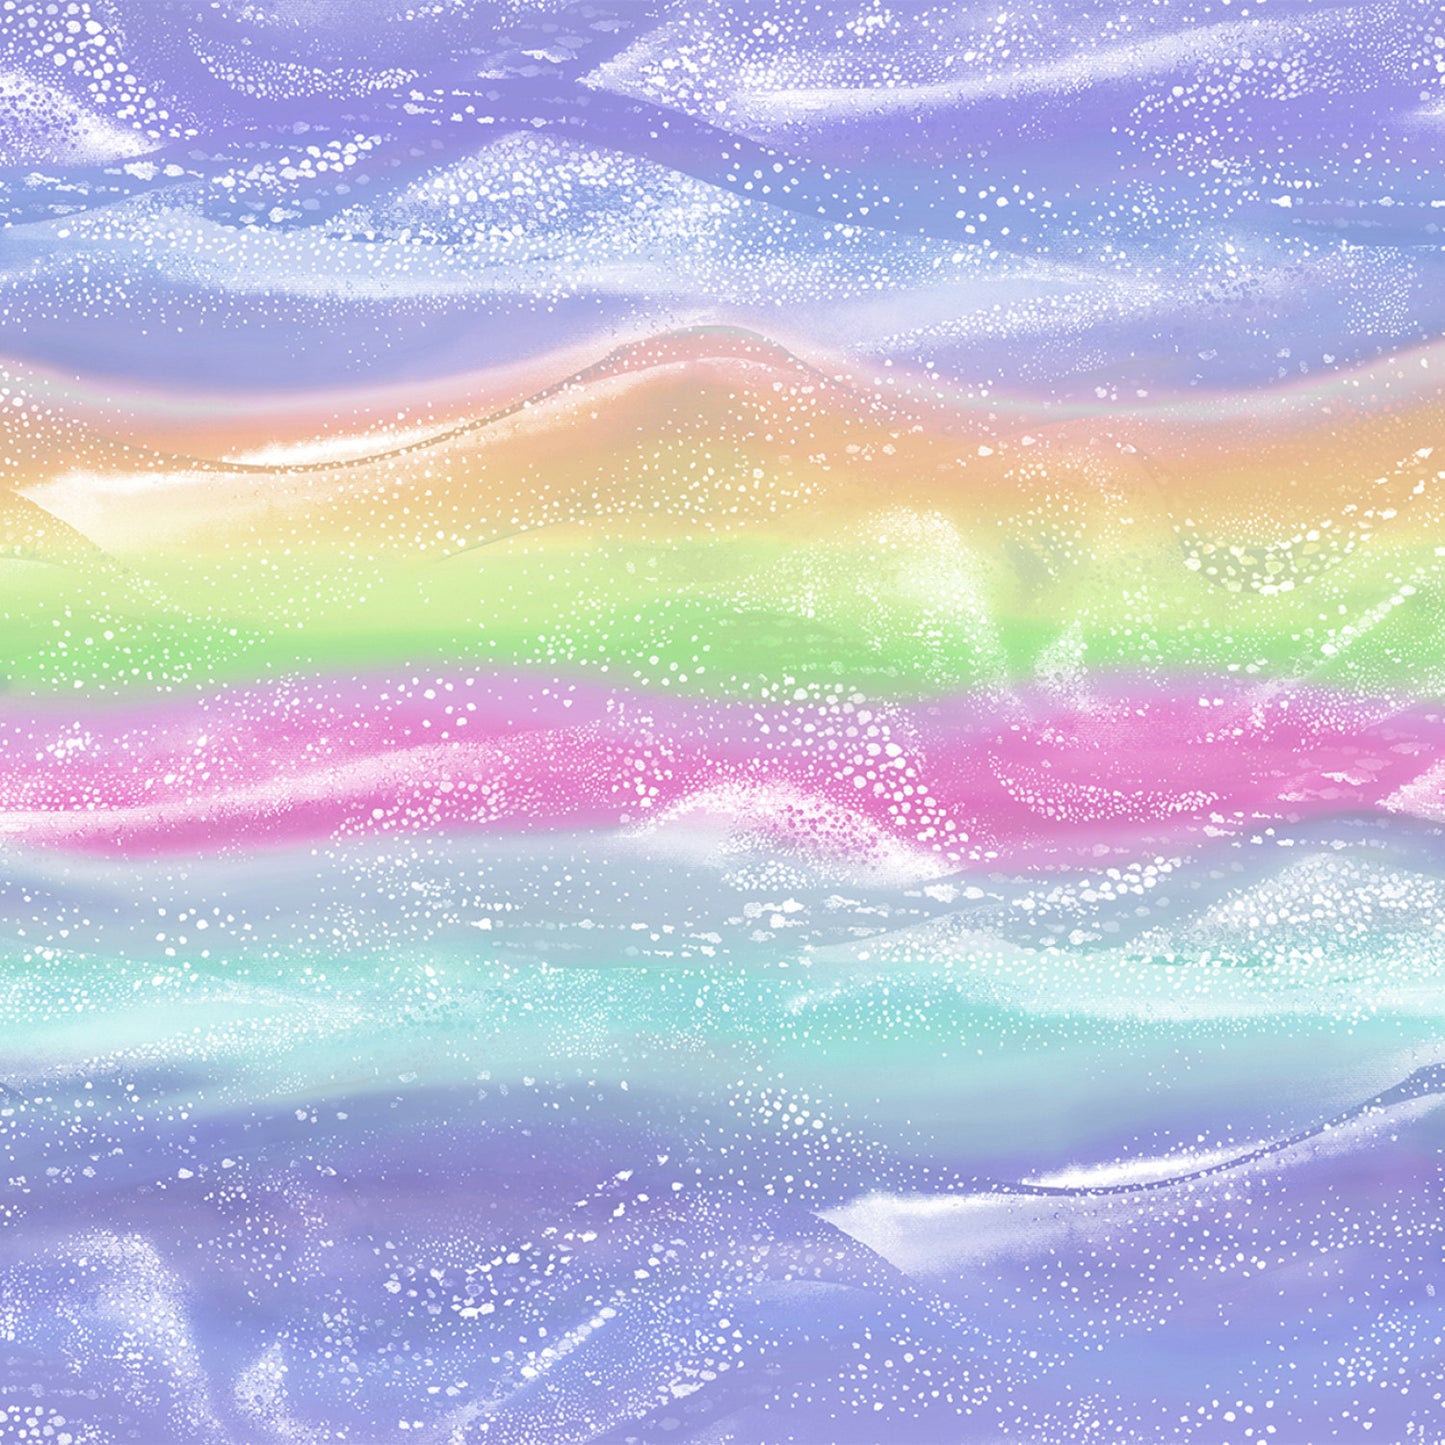 New Arrival: Pacifica Rainbow Waves Sold as a 25” Repeat Panel Cut Lilac and Pink D195V Cotton Woven Fabric